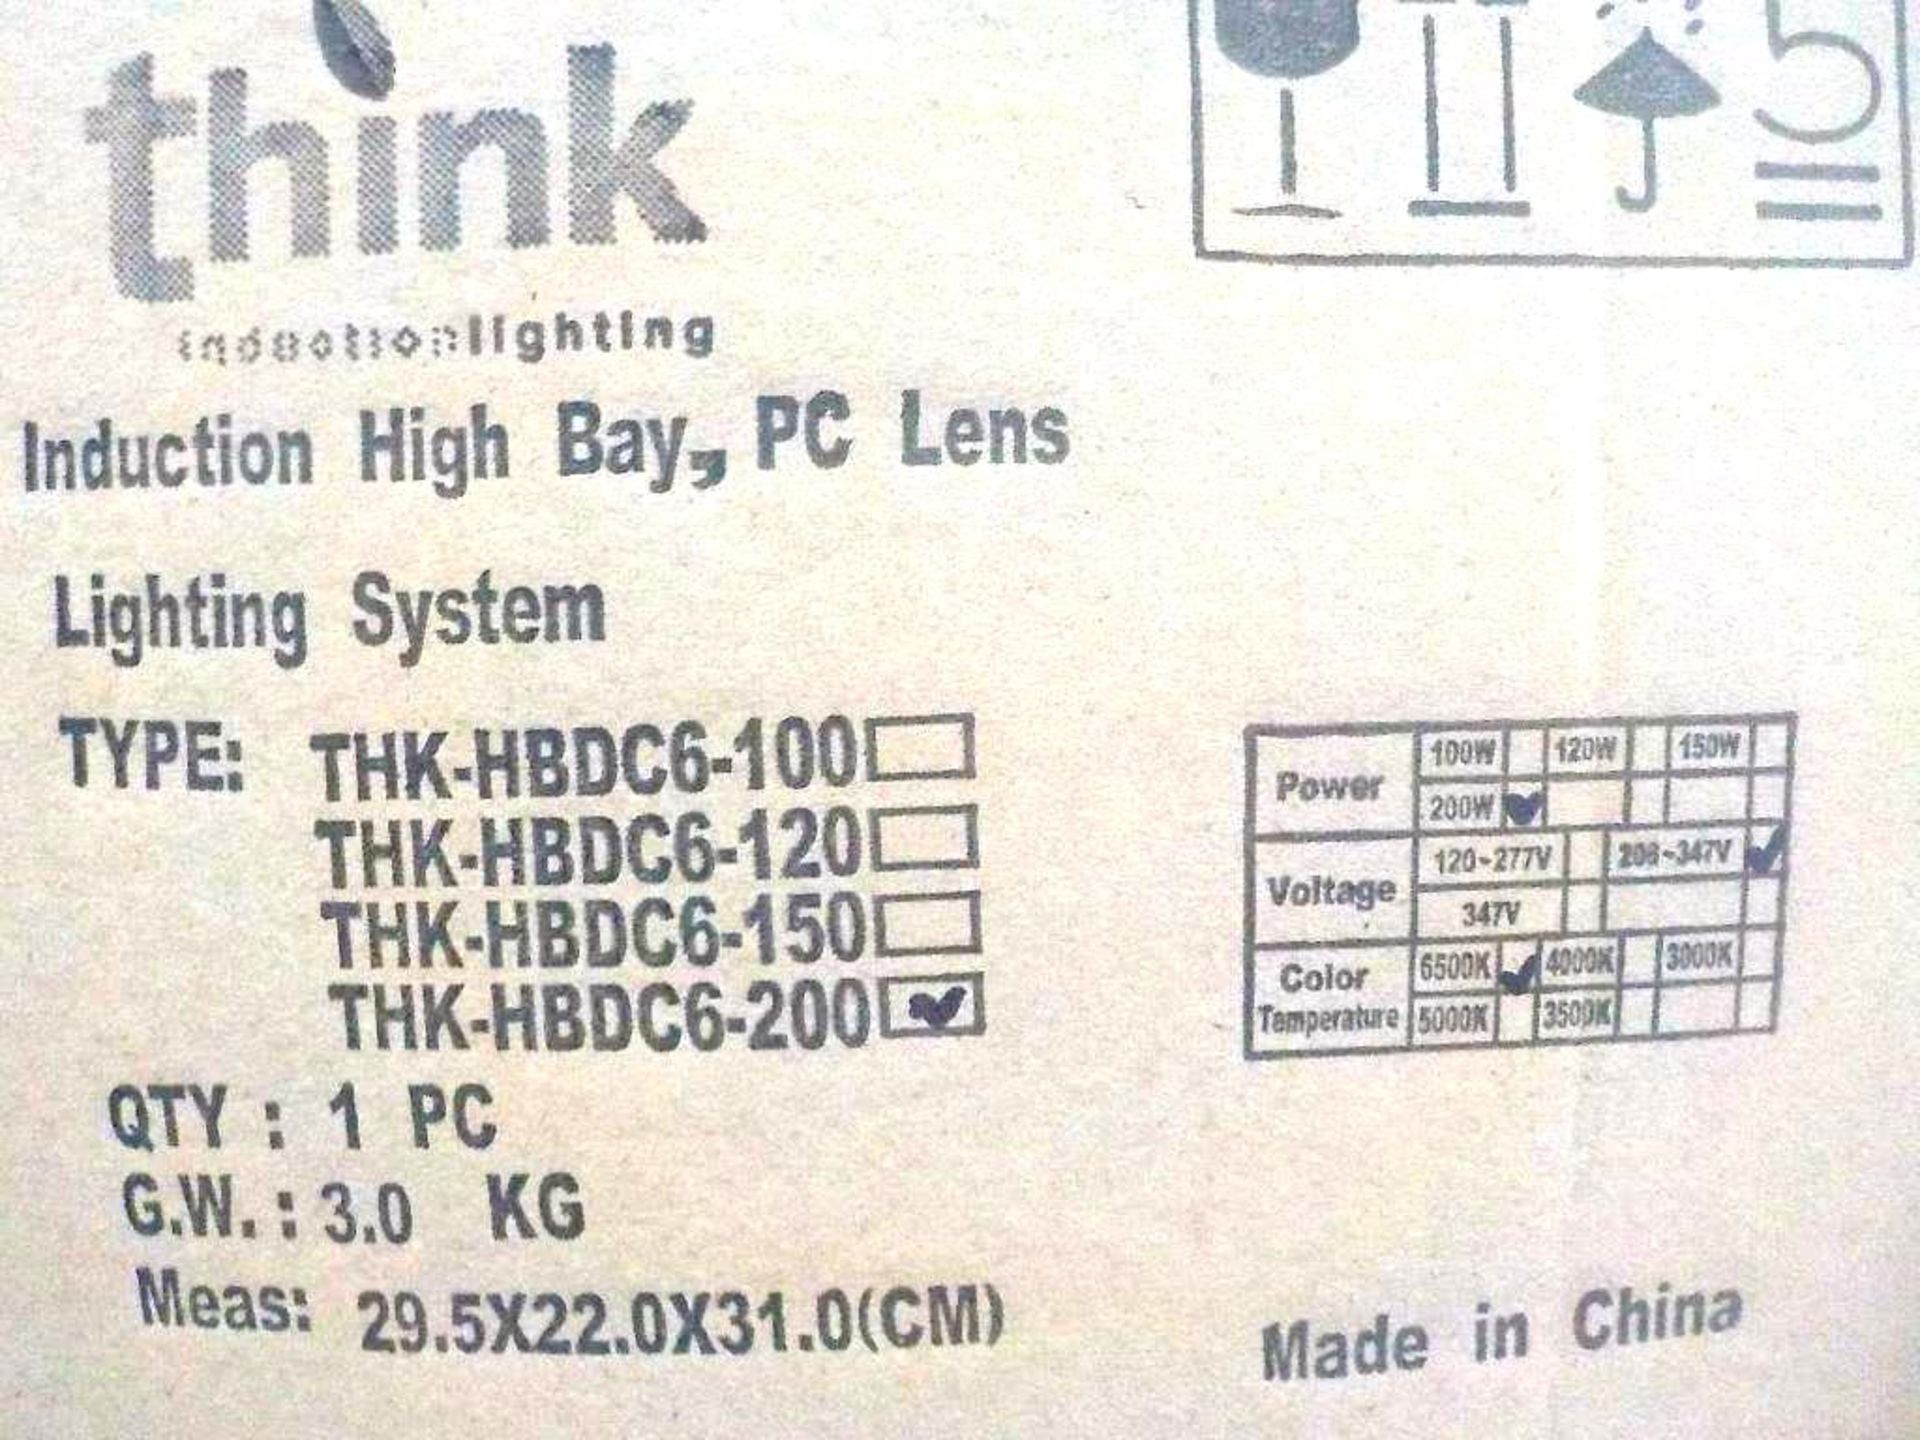 (set) fixture induction & ballast THINK #HBDC6-200 / induction fixtures w/ ballast - Image 2 of 2